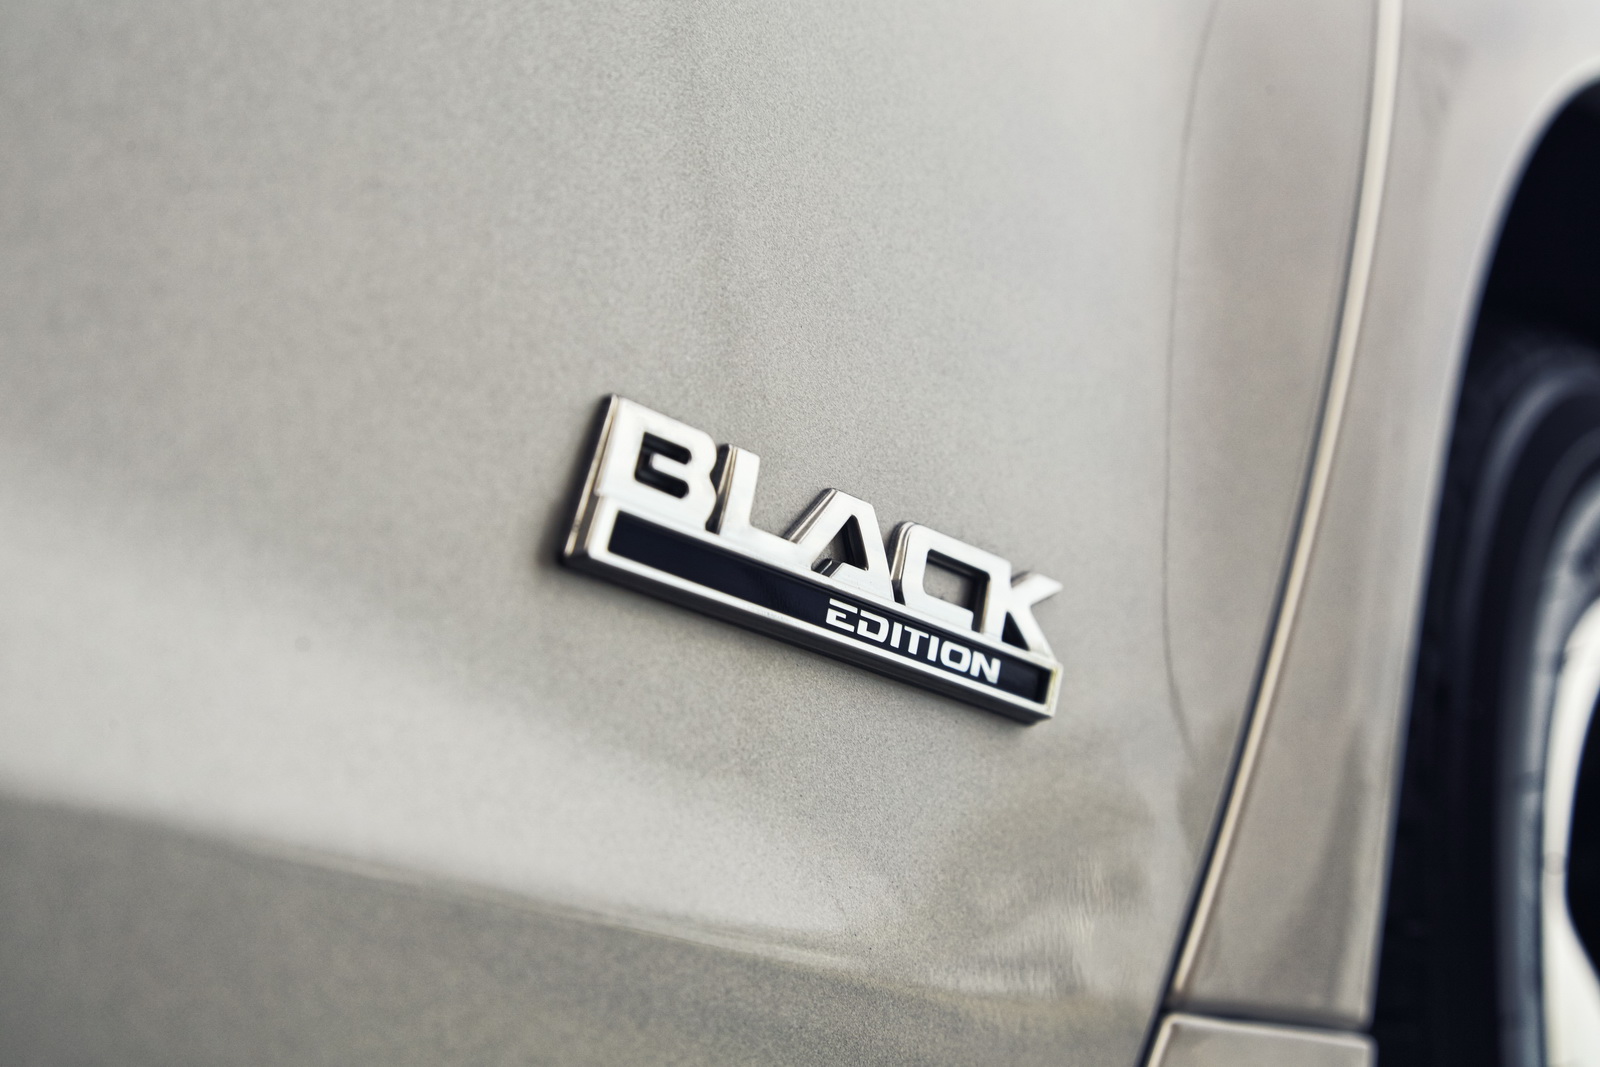 Holden Commodore Black Edition Brings Additional Content for $1k ...